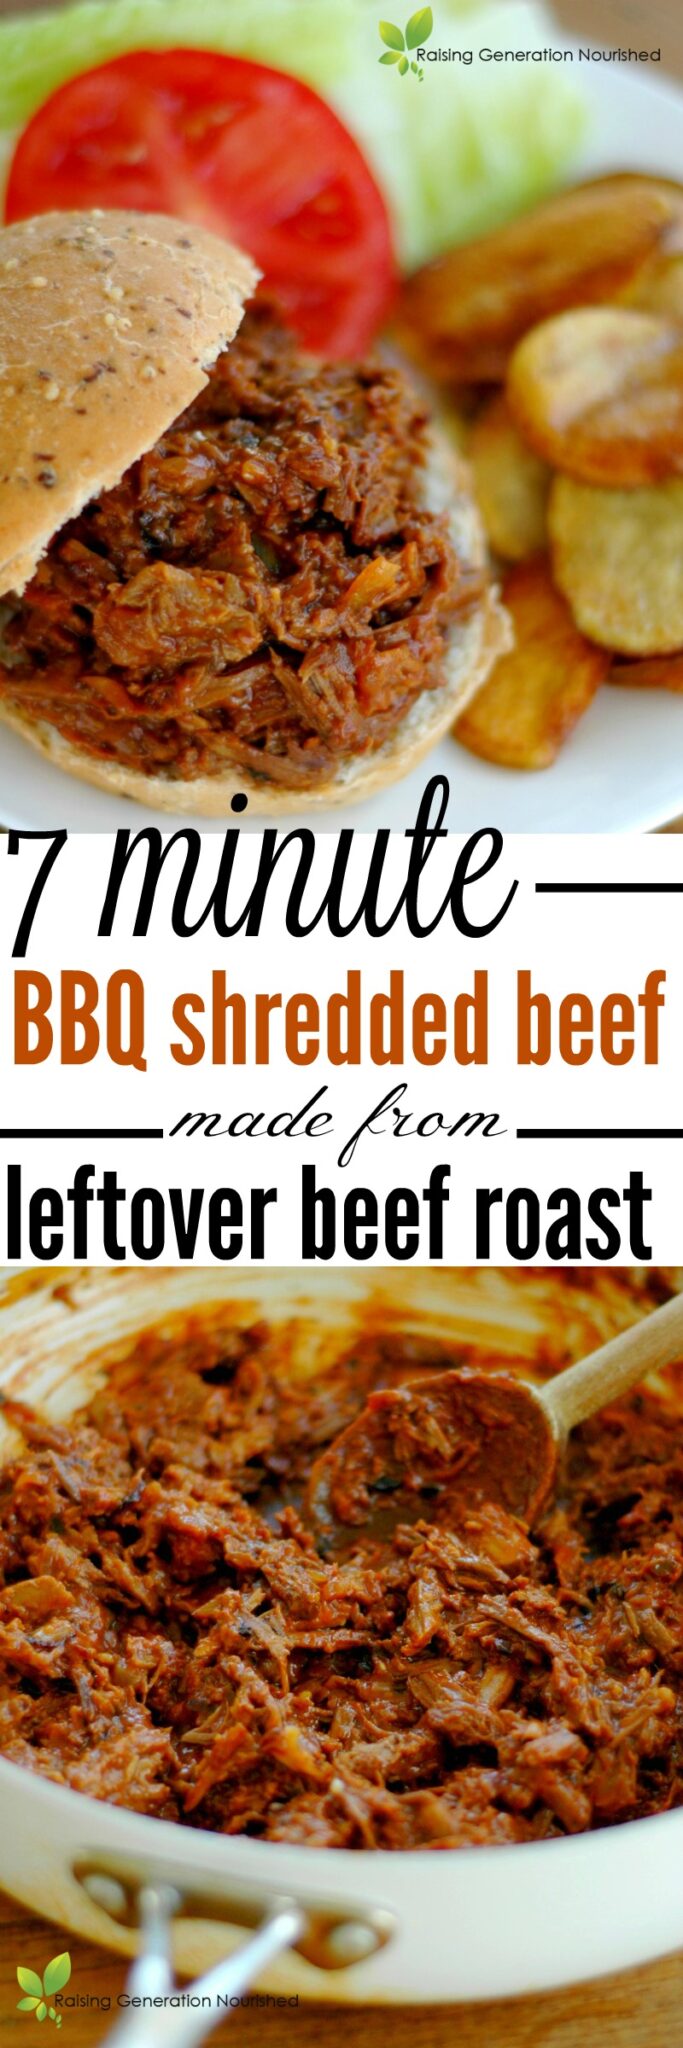 7 Minute BBQ Shredded Beef Made From Leftover Beef Roast - Raising ...